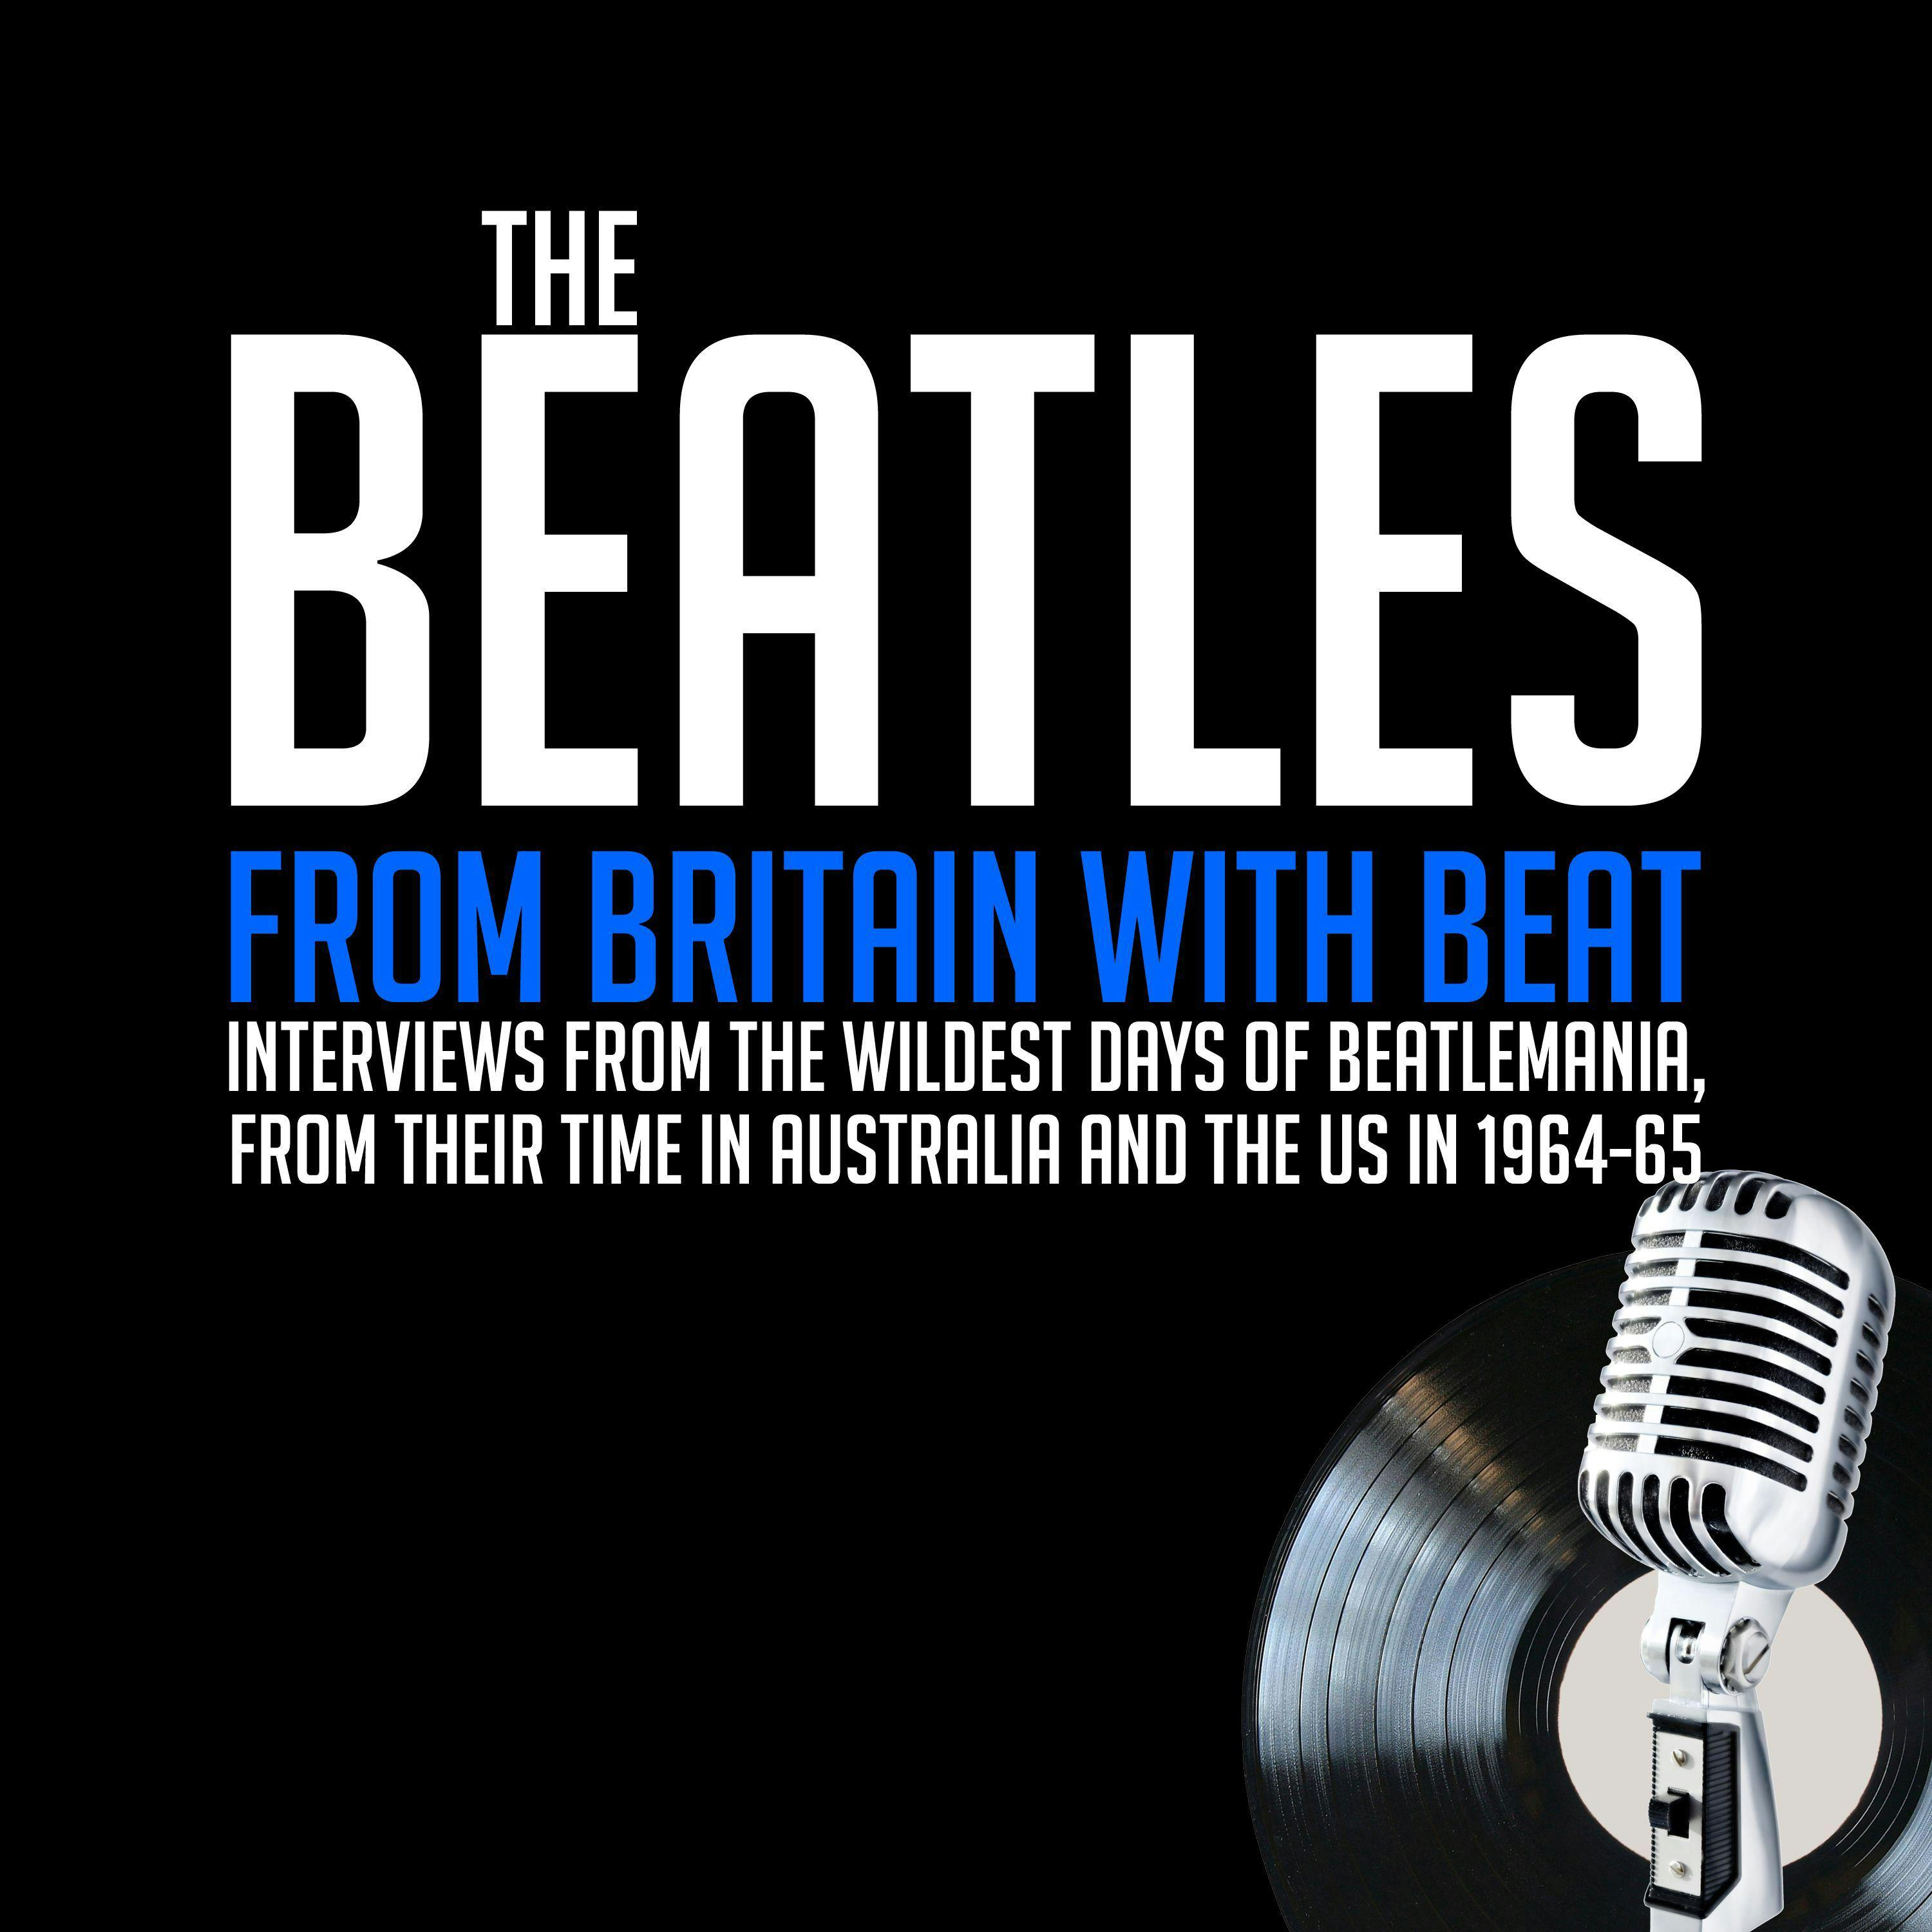 From Britain with Beat: Interviews from the WIldest Days of Beatlemania, from Their Time in Australia and the US in 1964-65 - George Harrison, John Lennon, Ringo Starr, Paul McCartney, William Ruhlmann